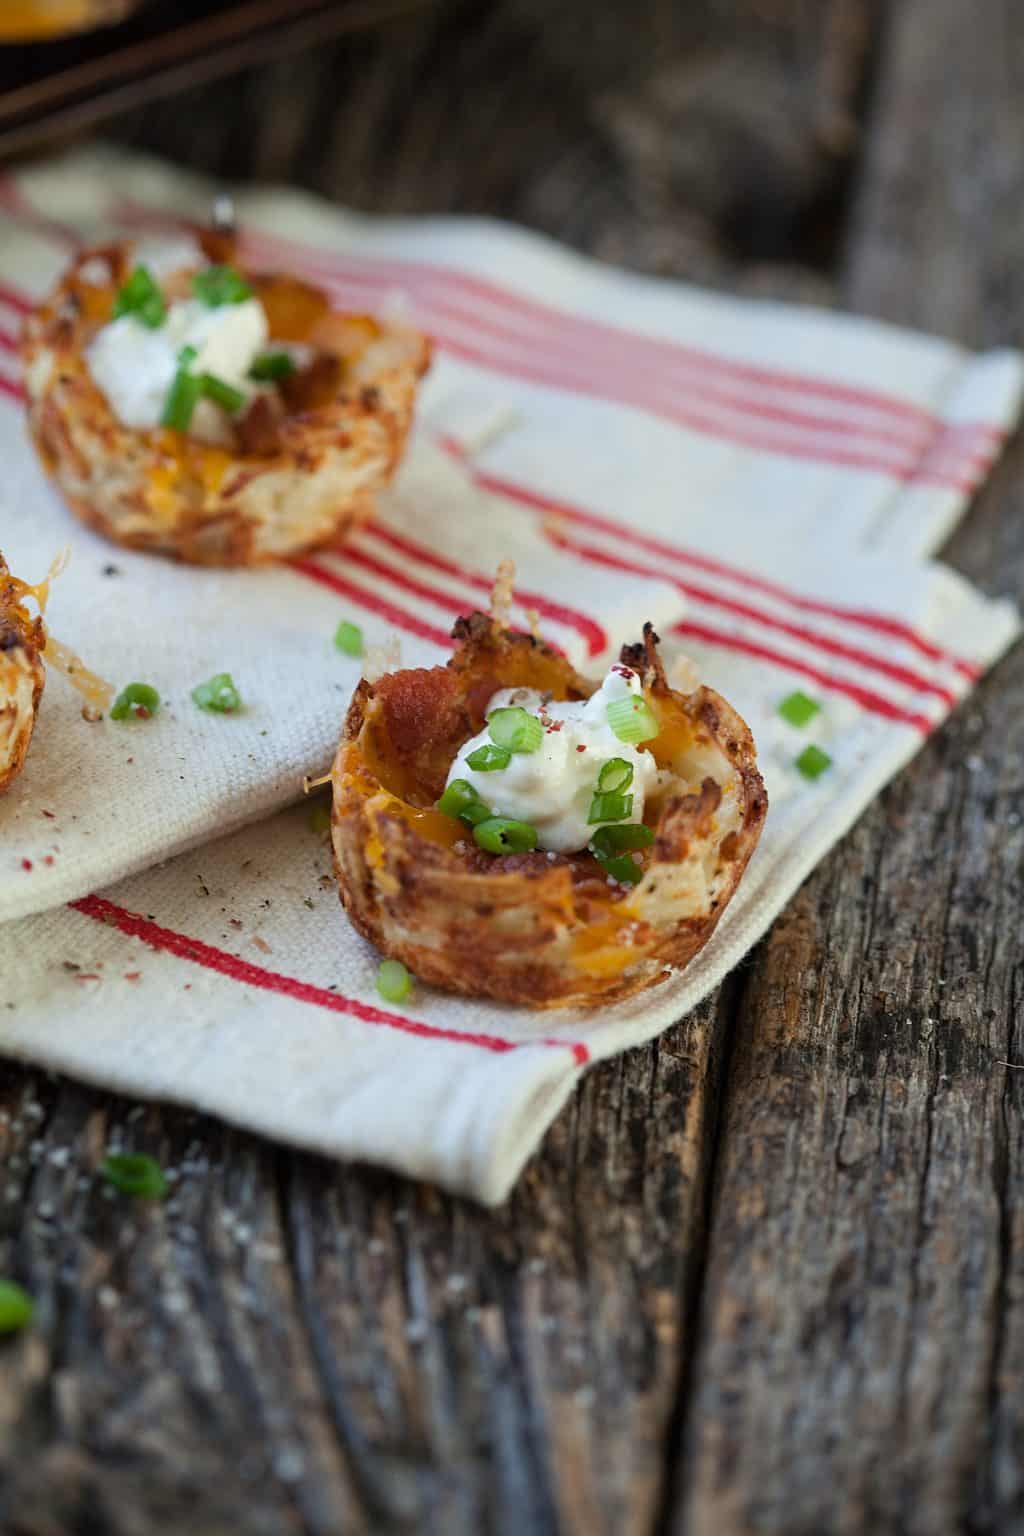 Loaded hash brown potato skins take away all the messy baking, scraping and remaking of a traditional potato skin and make it simple, affordable and tasty!